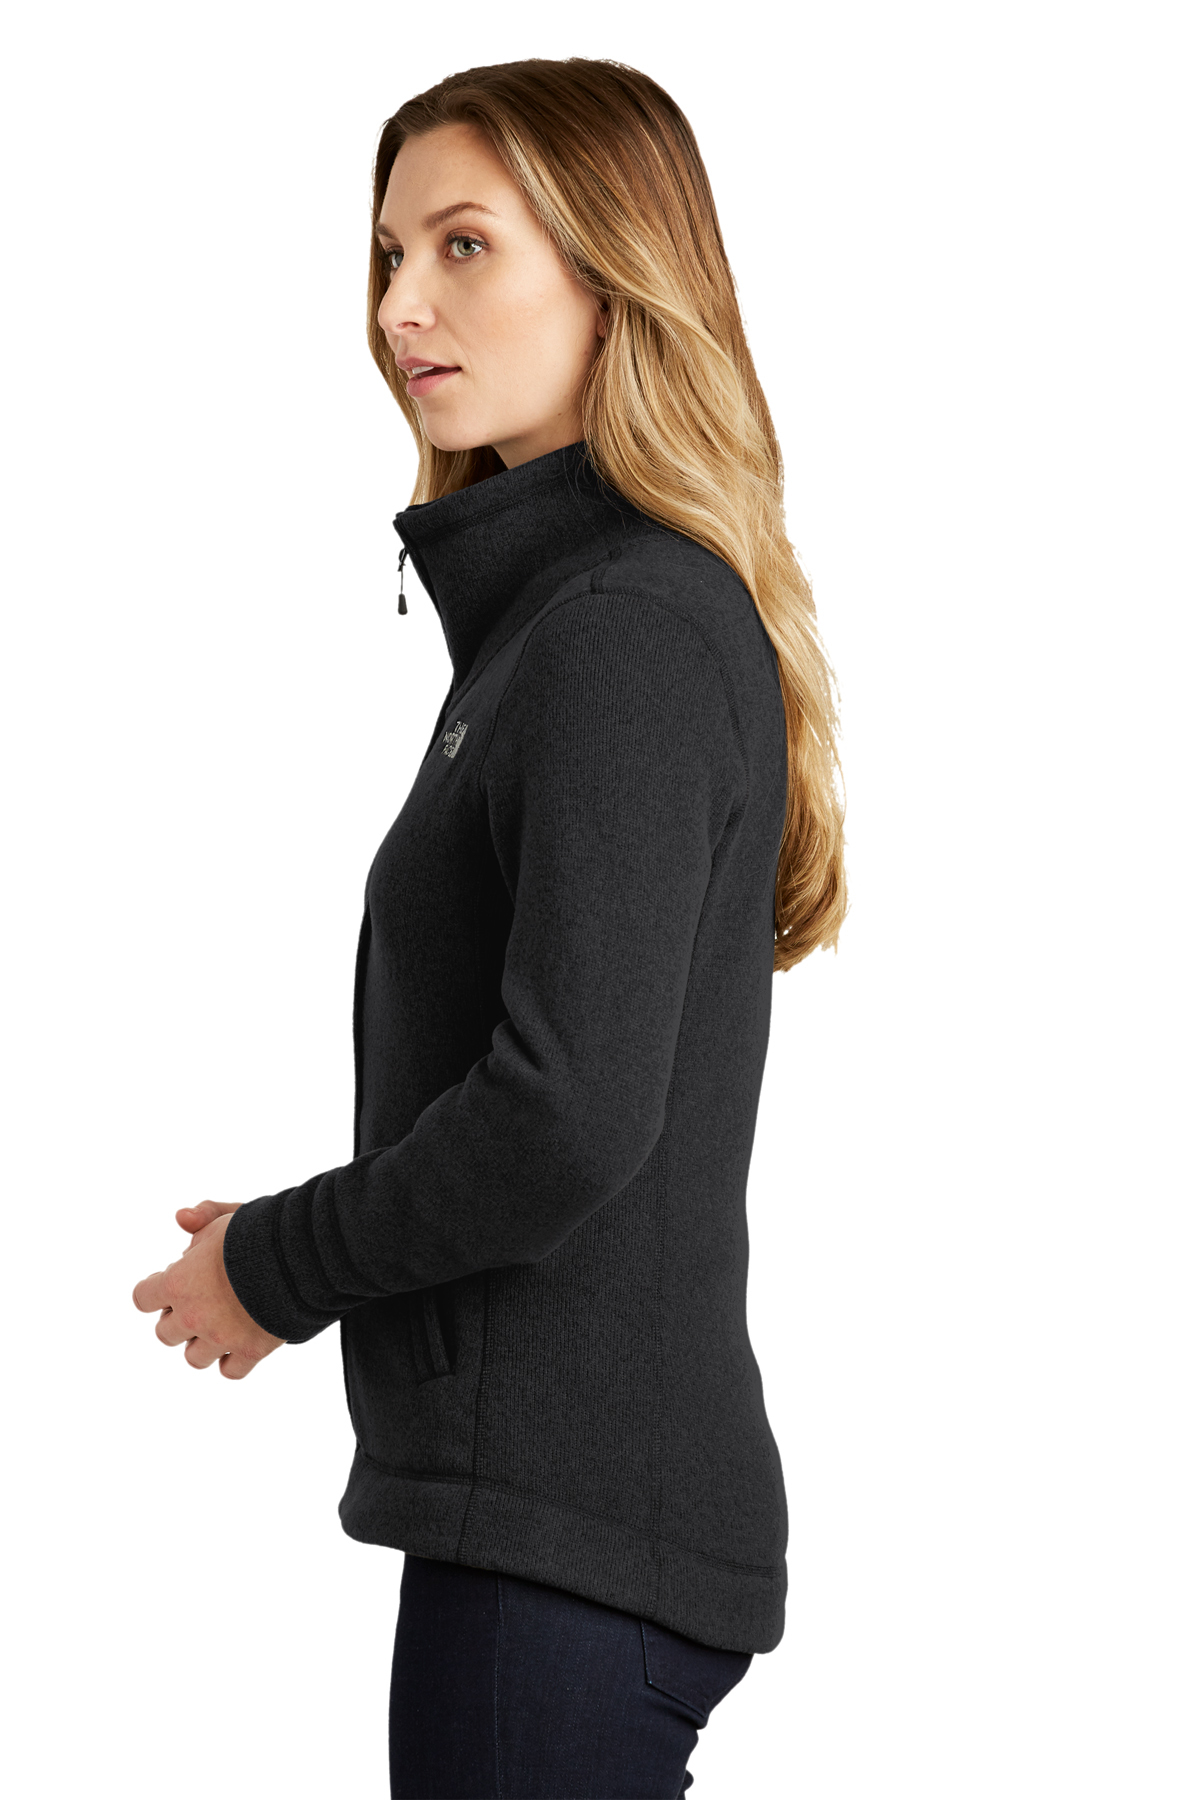 The North Face ® Ladies Sweater Fleece Jacket | Product | Company Casuals